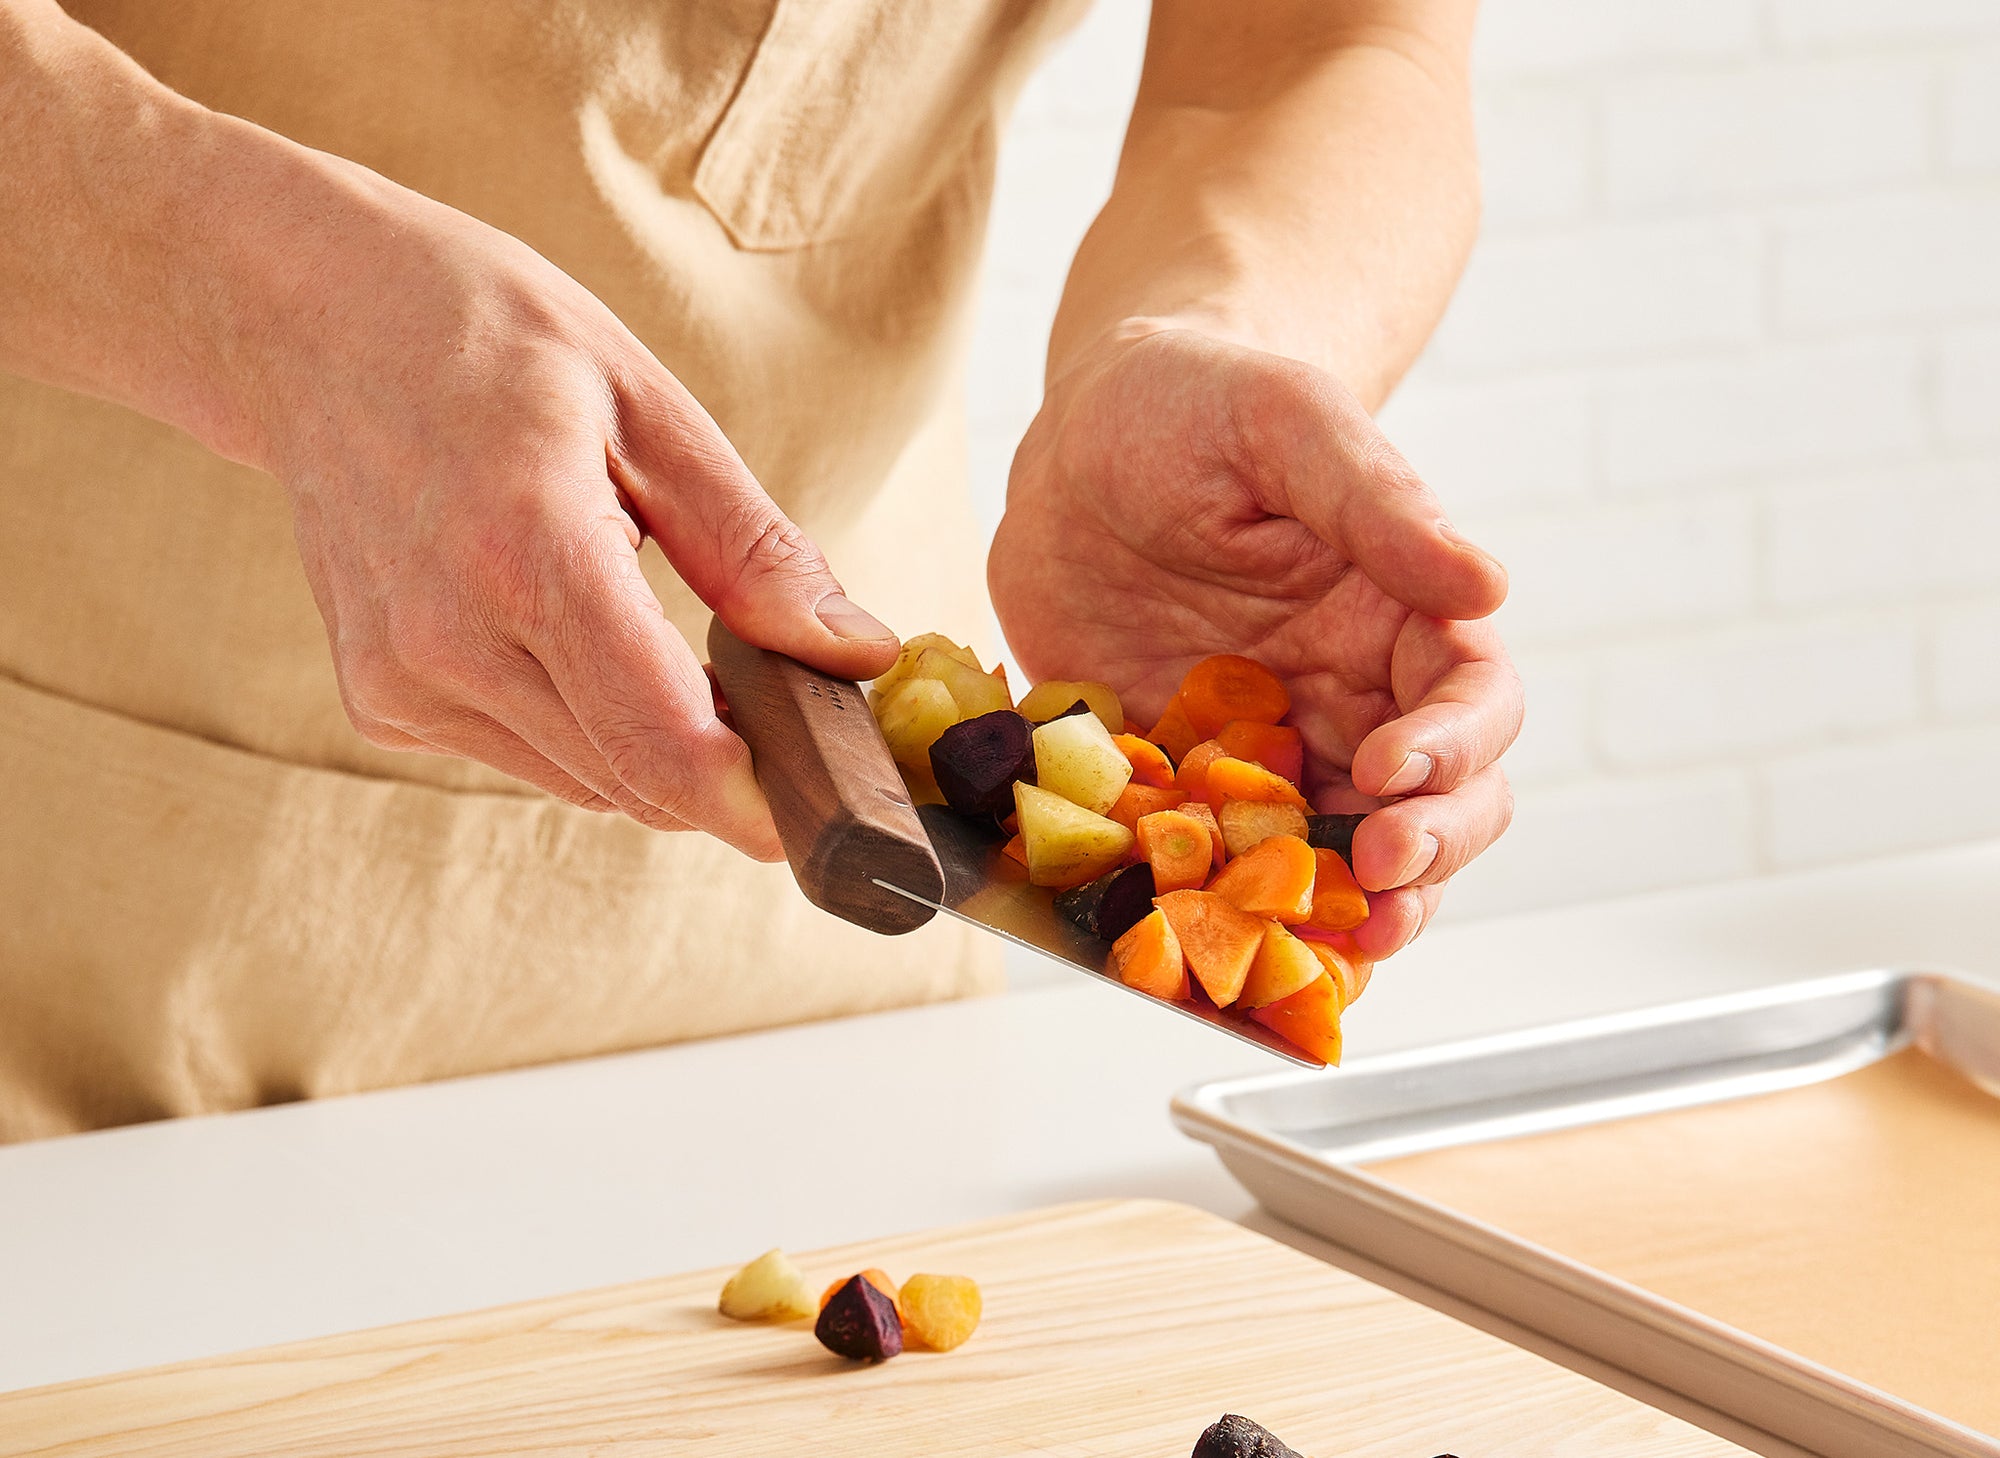 {{walnut,blue}} A pair of hands uses a Misen Bench Scraper with walnut handle to scoop chopped root vegetables up from a Misen Wood Cutting Board.